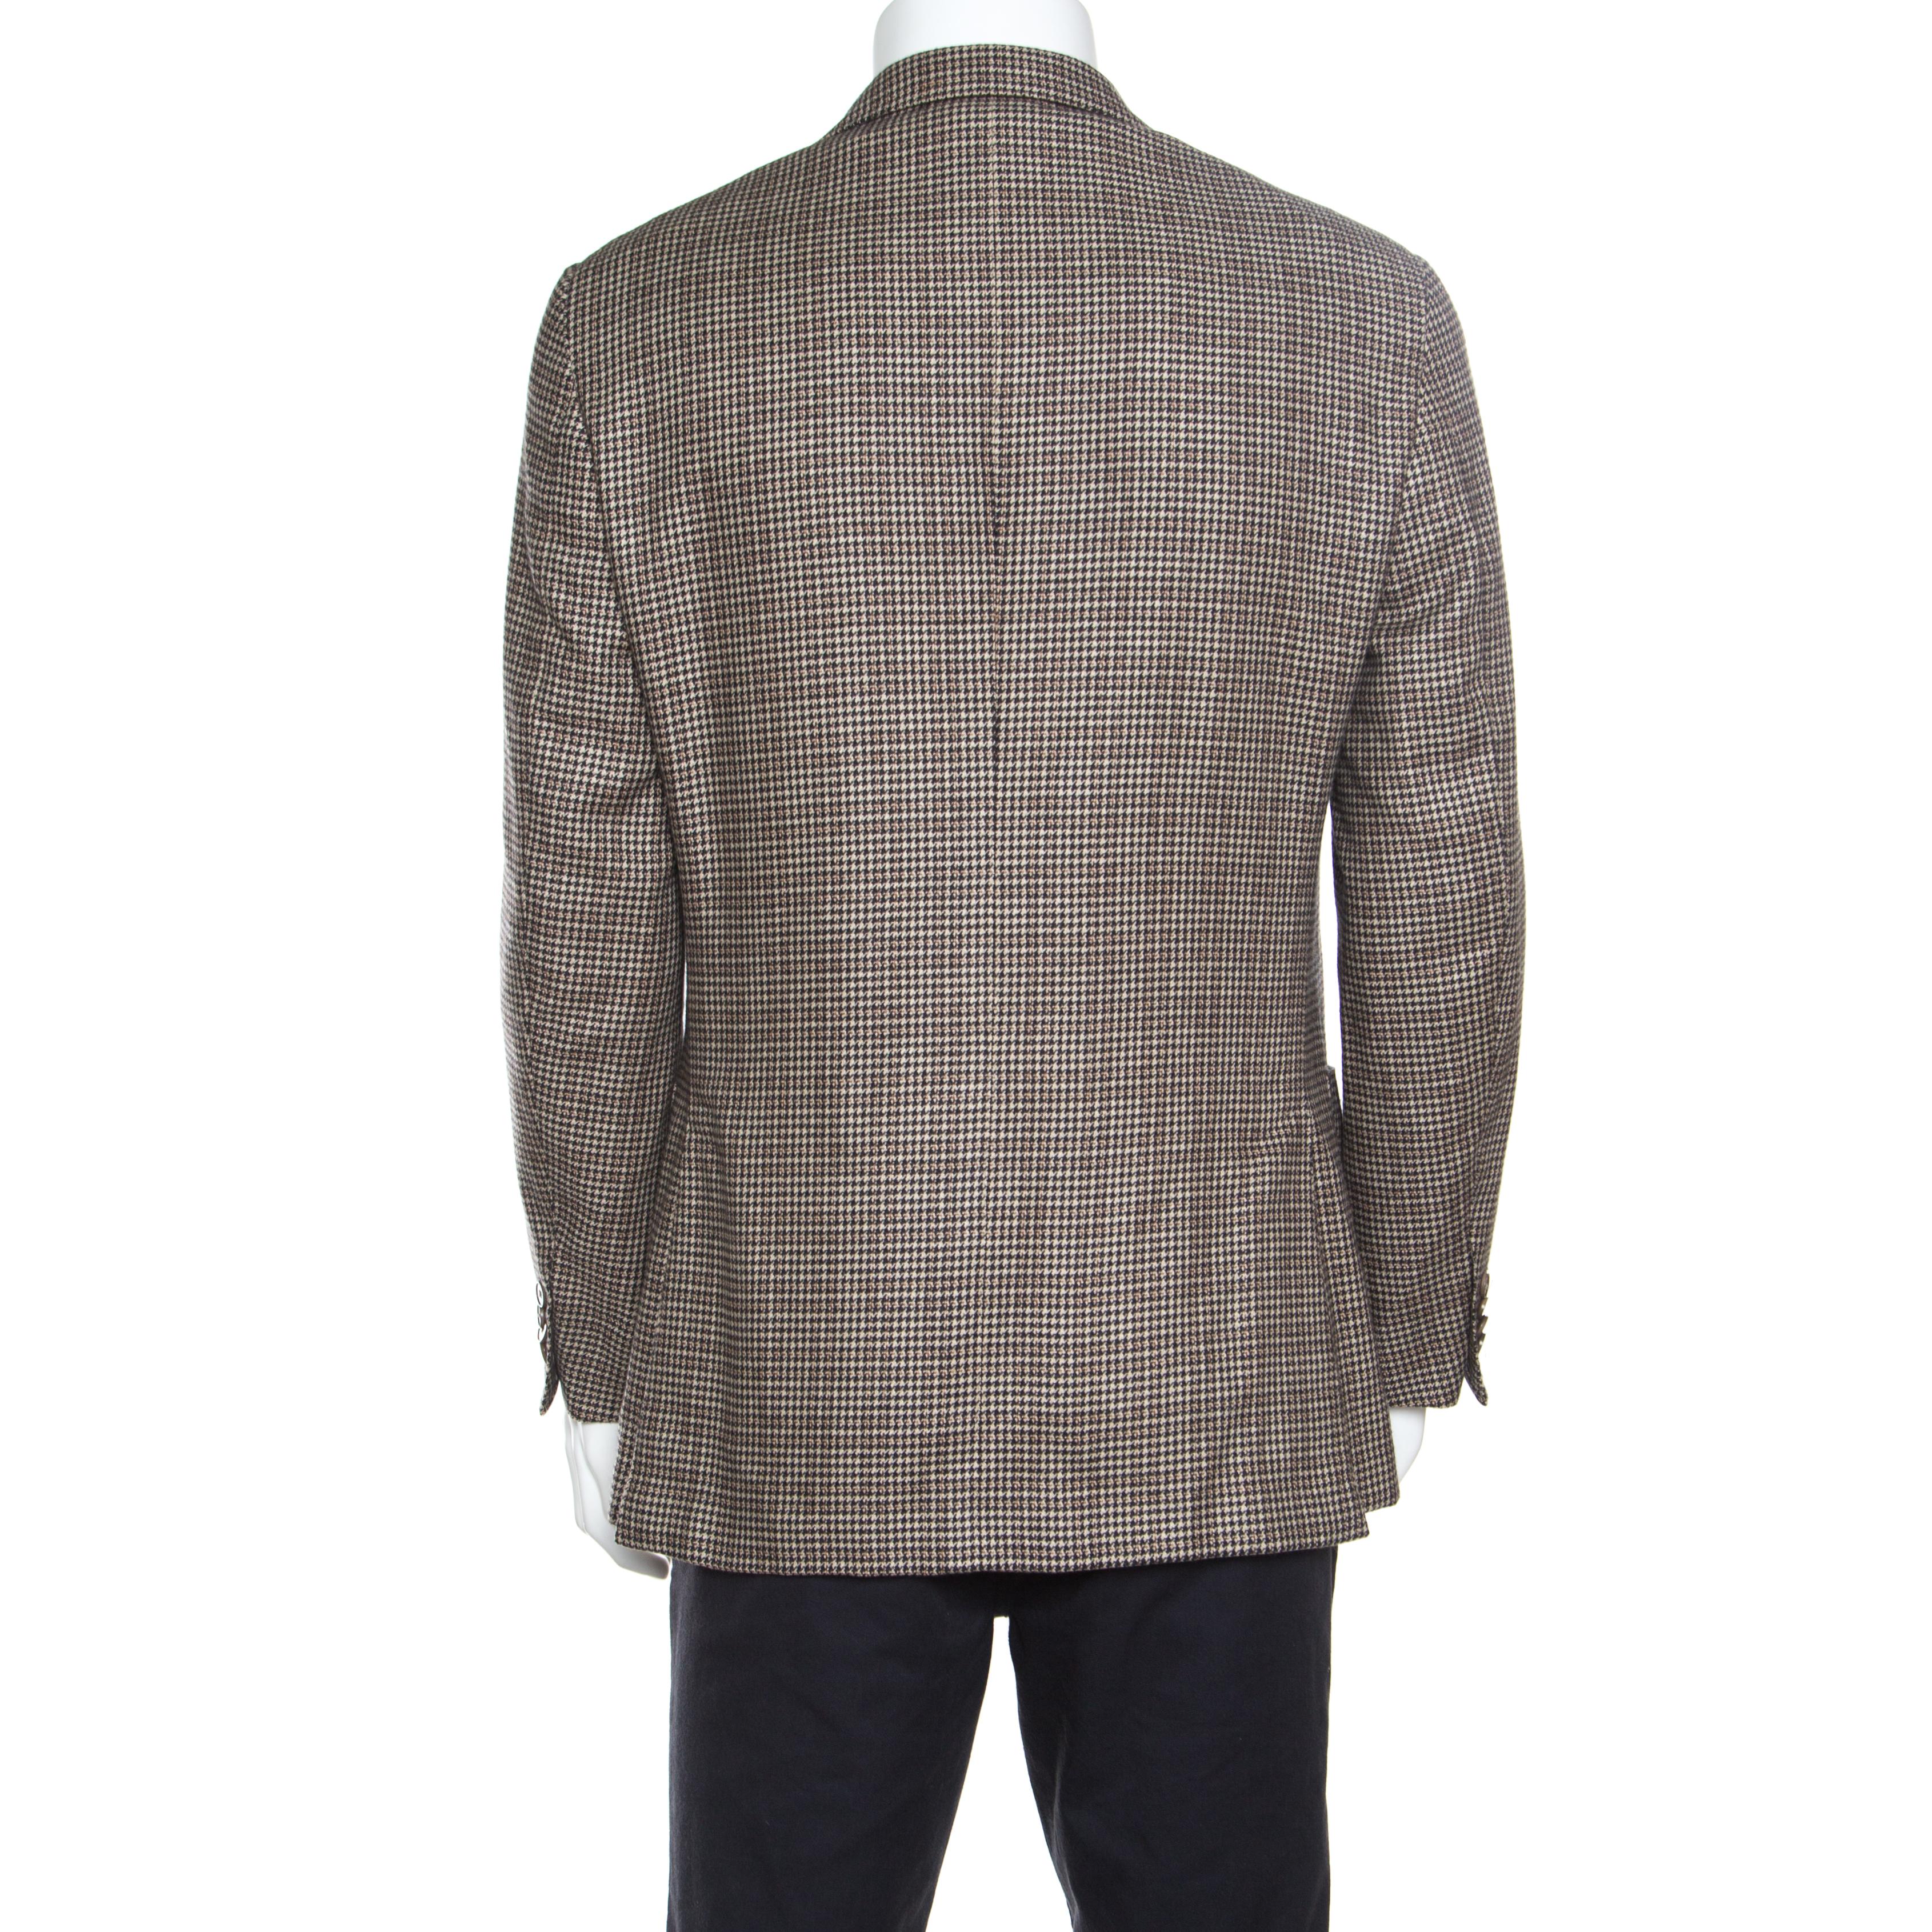 Nothing gives you a better style than a well-tailored blazer. This Mila blazer by Ermenegildo Zegna is a classic creation meant to elevate your formal look. Cut from a brown wool and cashmere blend, it is adorned with a quirky houndstooth pattern